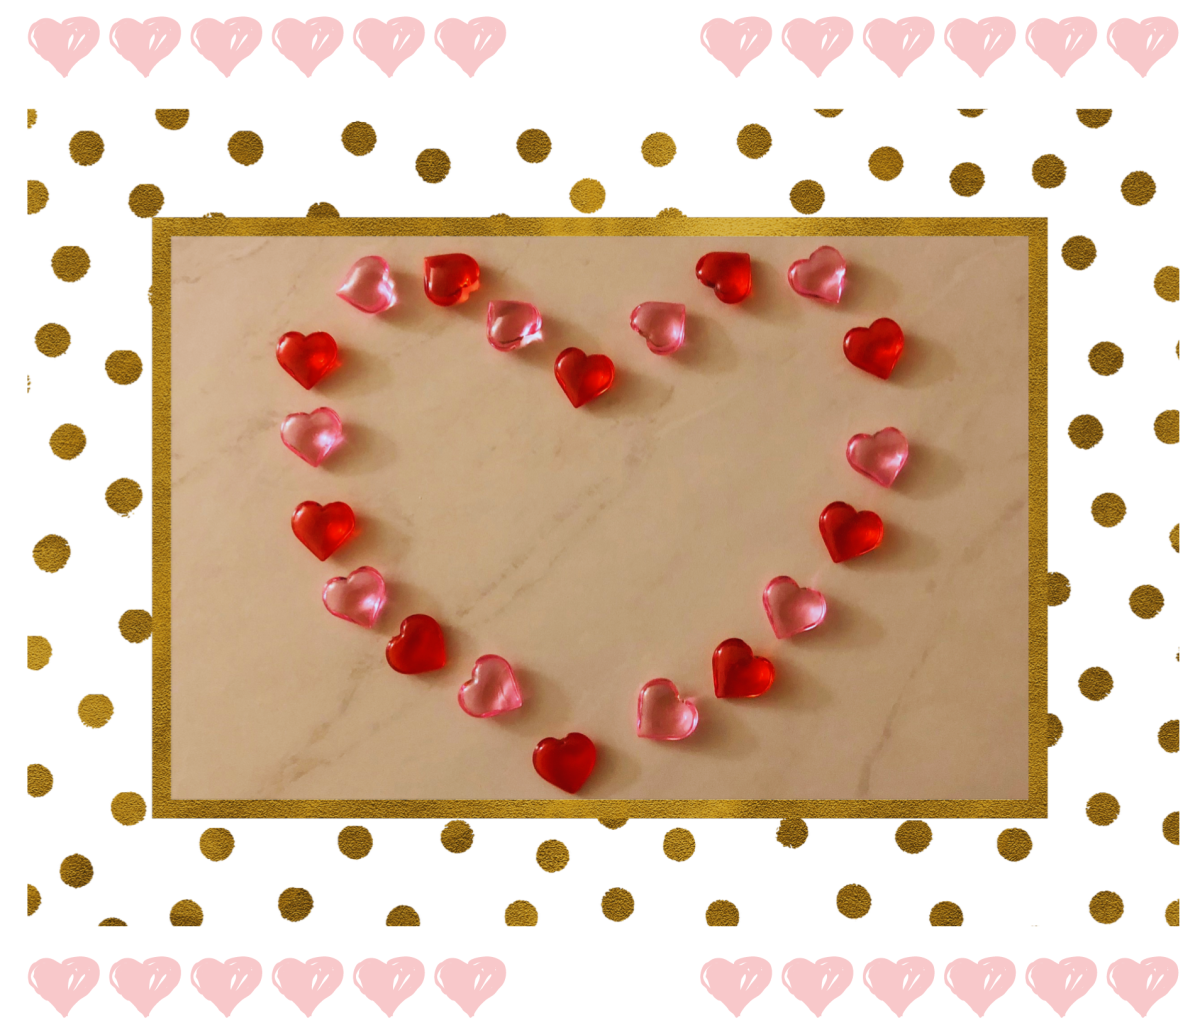 “Valentines for Life” – a Sweet Valentine’s Day Poem